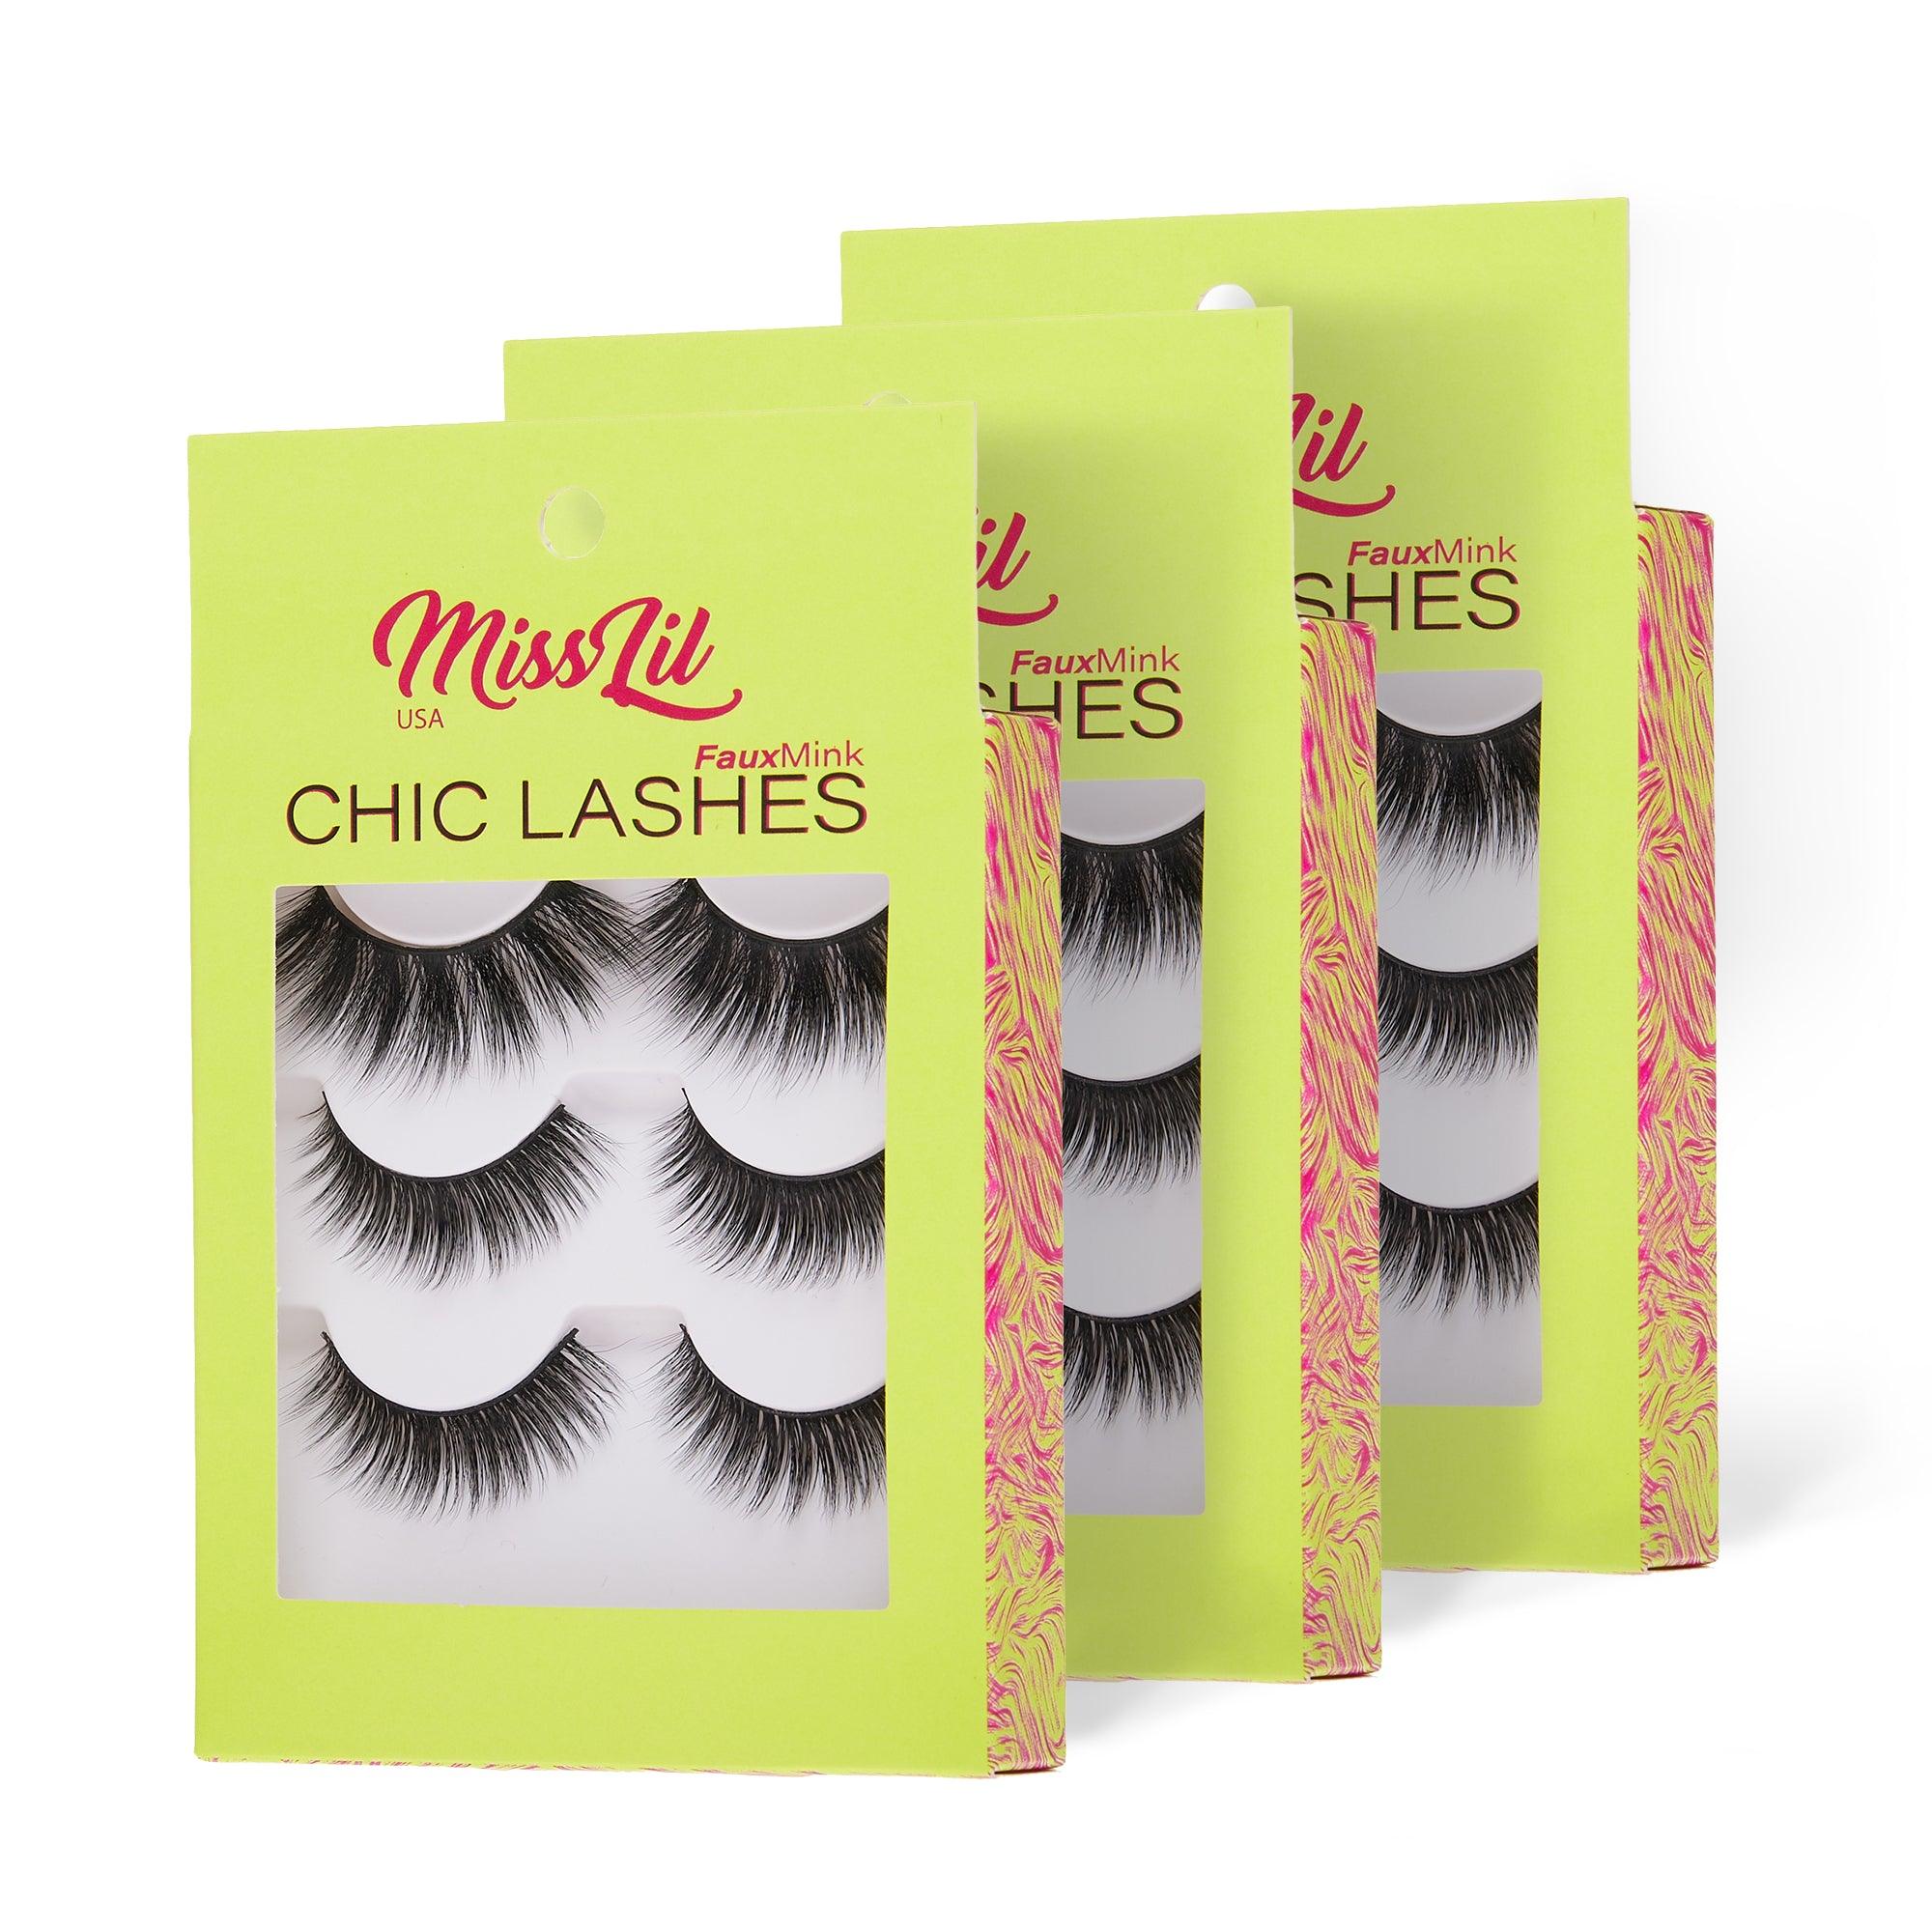 3-Pairs Lashes-Chic Lashes Collection #32 (Pack of 12) - Miss Lil USA Wholesale